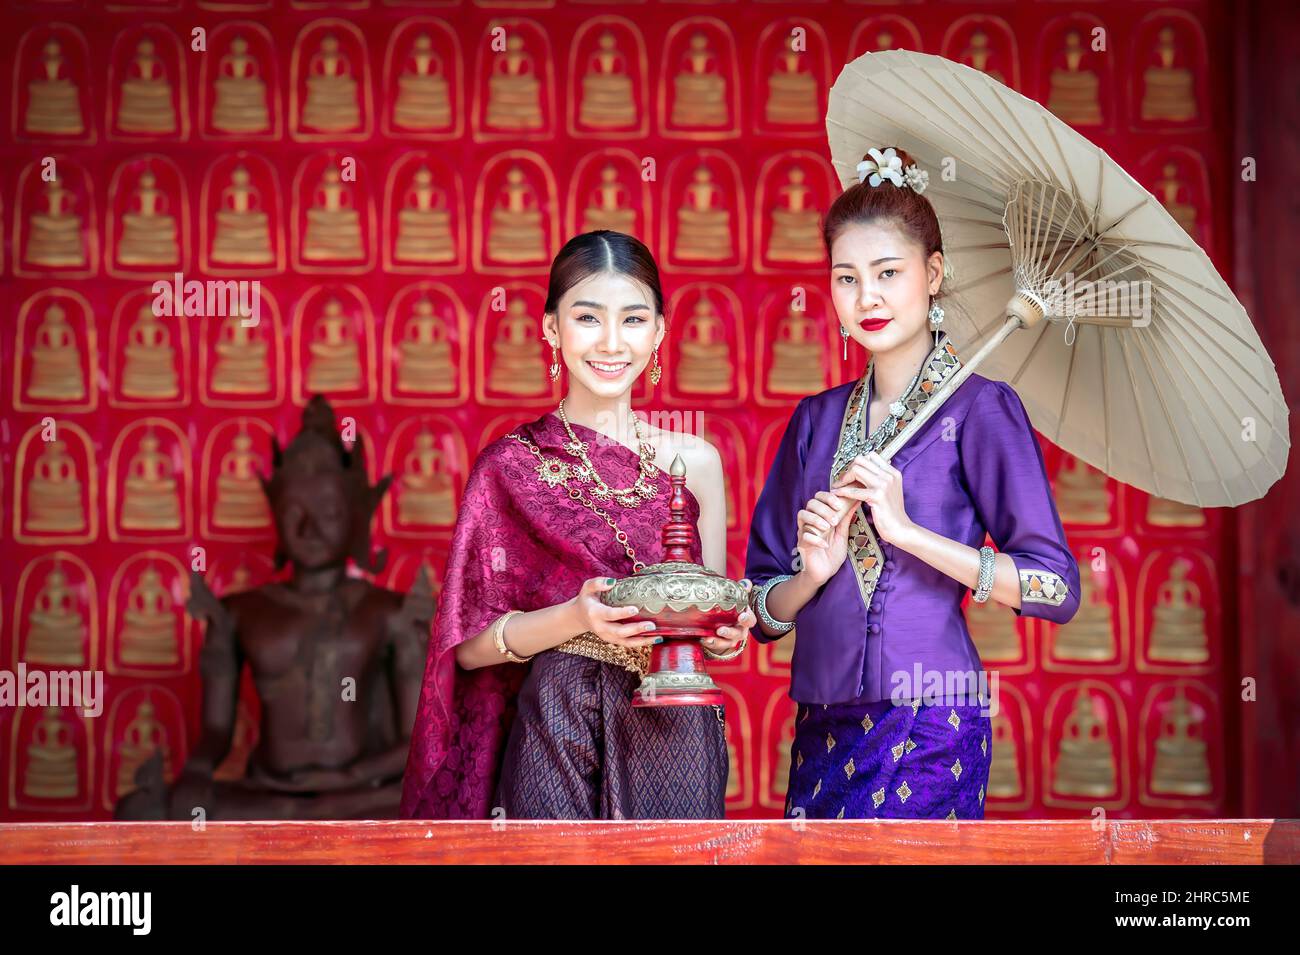 Portrait of two smiling women in traditional clothing standing by a Buddha statue, Chiang Mai, Thailand Stock Photo